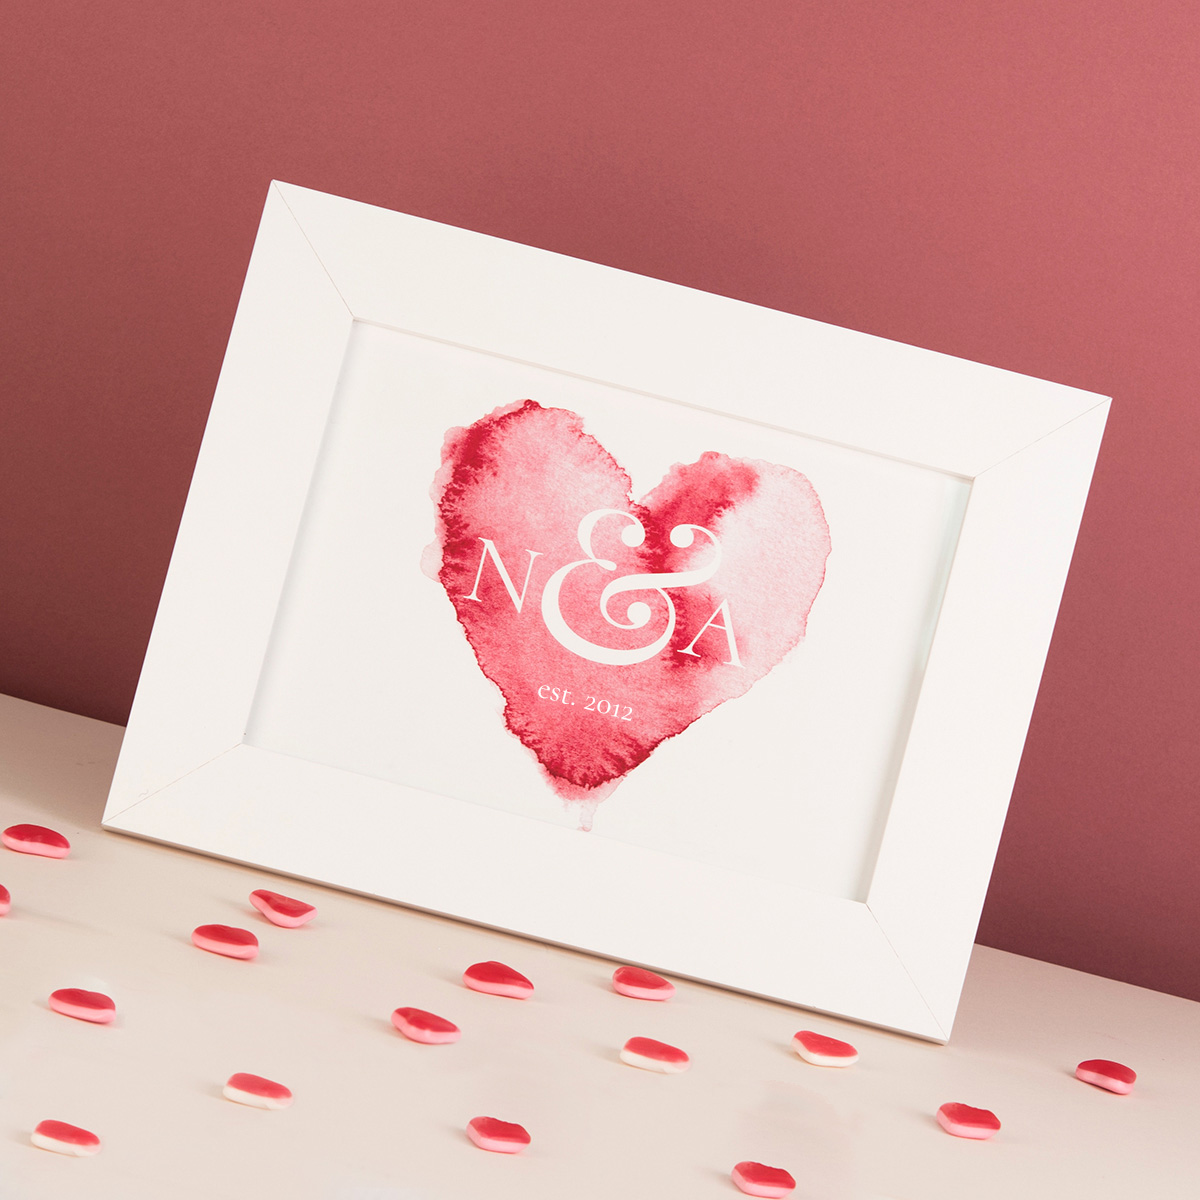 Personalised Framed Print - Watercolour Heart